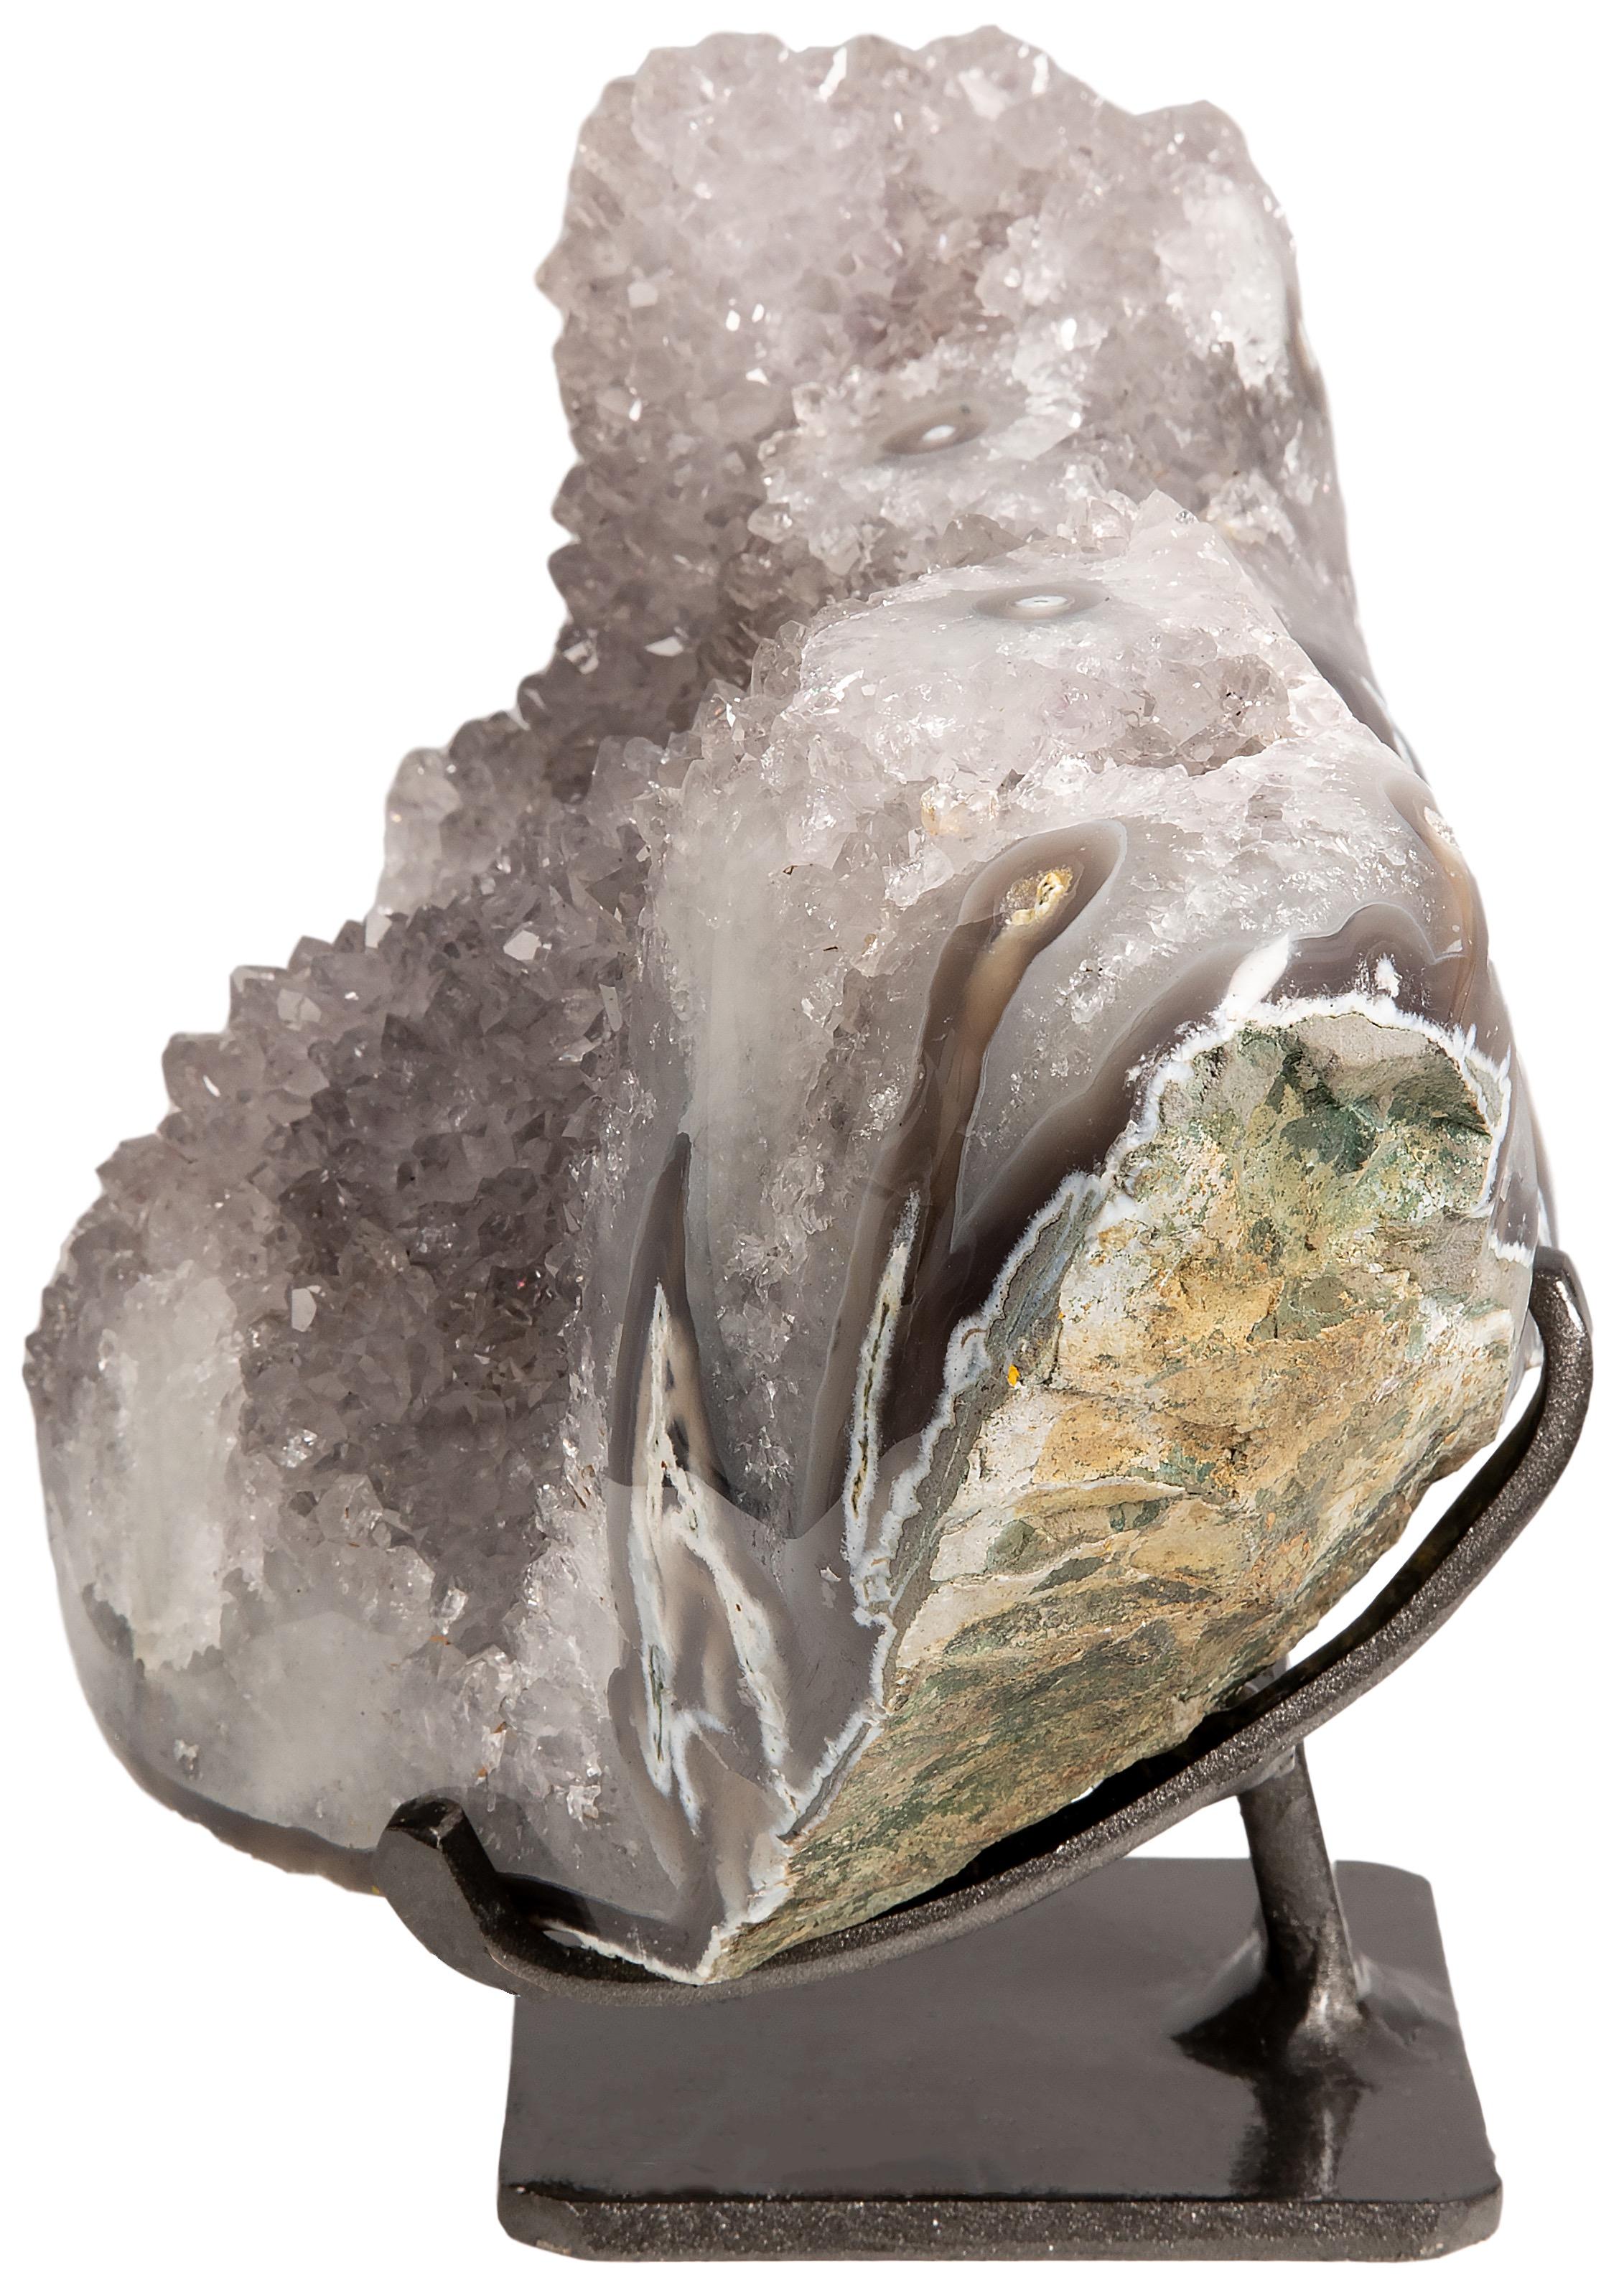 This piece comprises of a stunning example of white quartz, elegantly displayed on a metal stand, with a naturally decorative multiple stalactite adornment. 

The polished borders of the formation allow one to appreciate the visible grey, brown